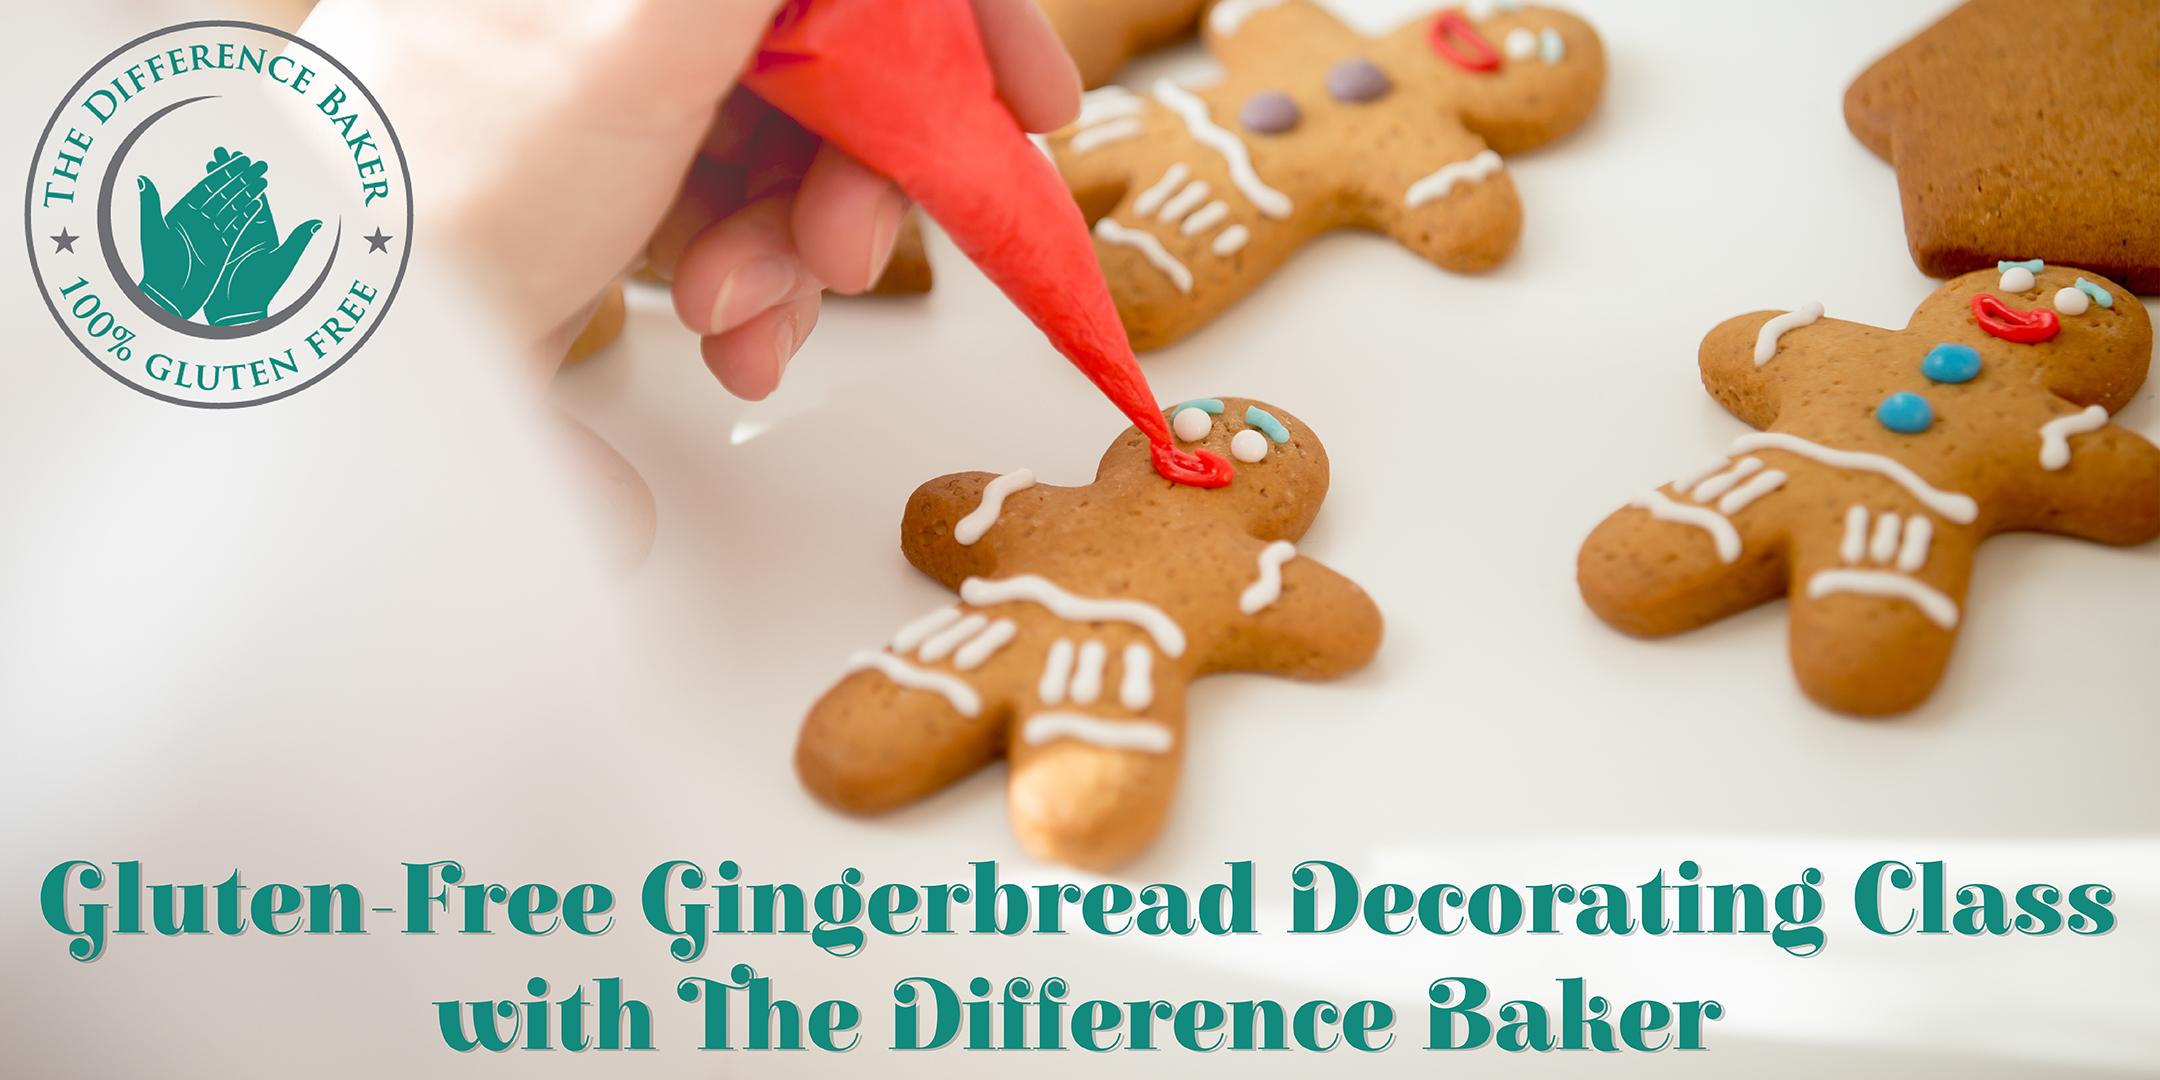 Gluten-Free Gingerbread Decorating Class for Kids with The Difference Baker